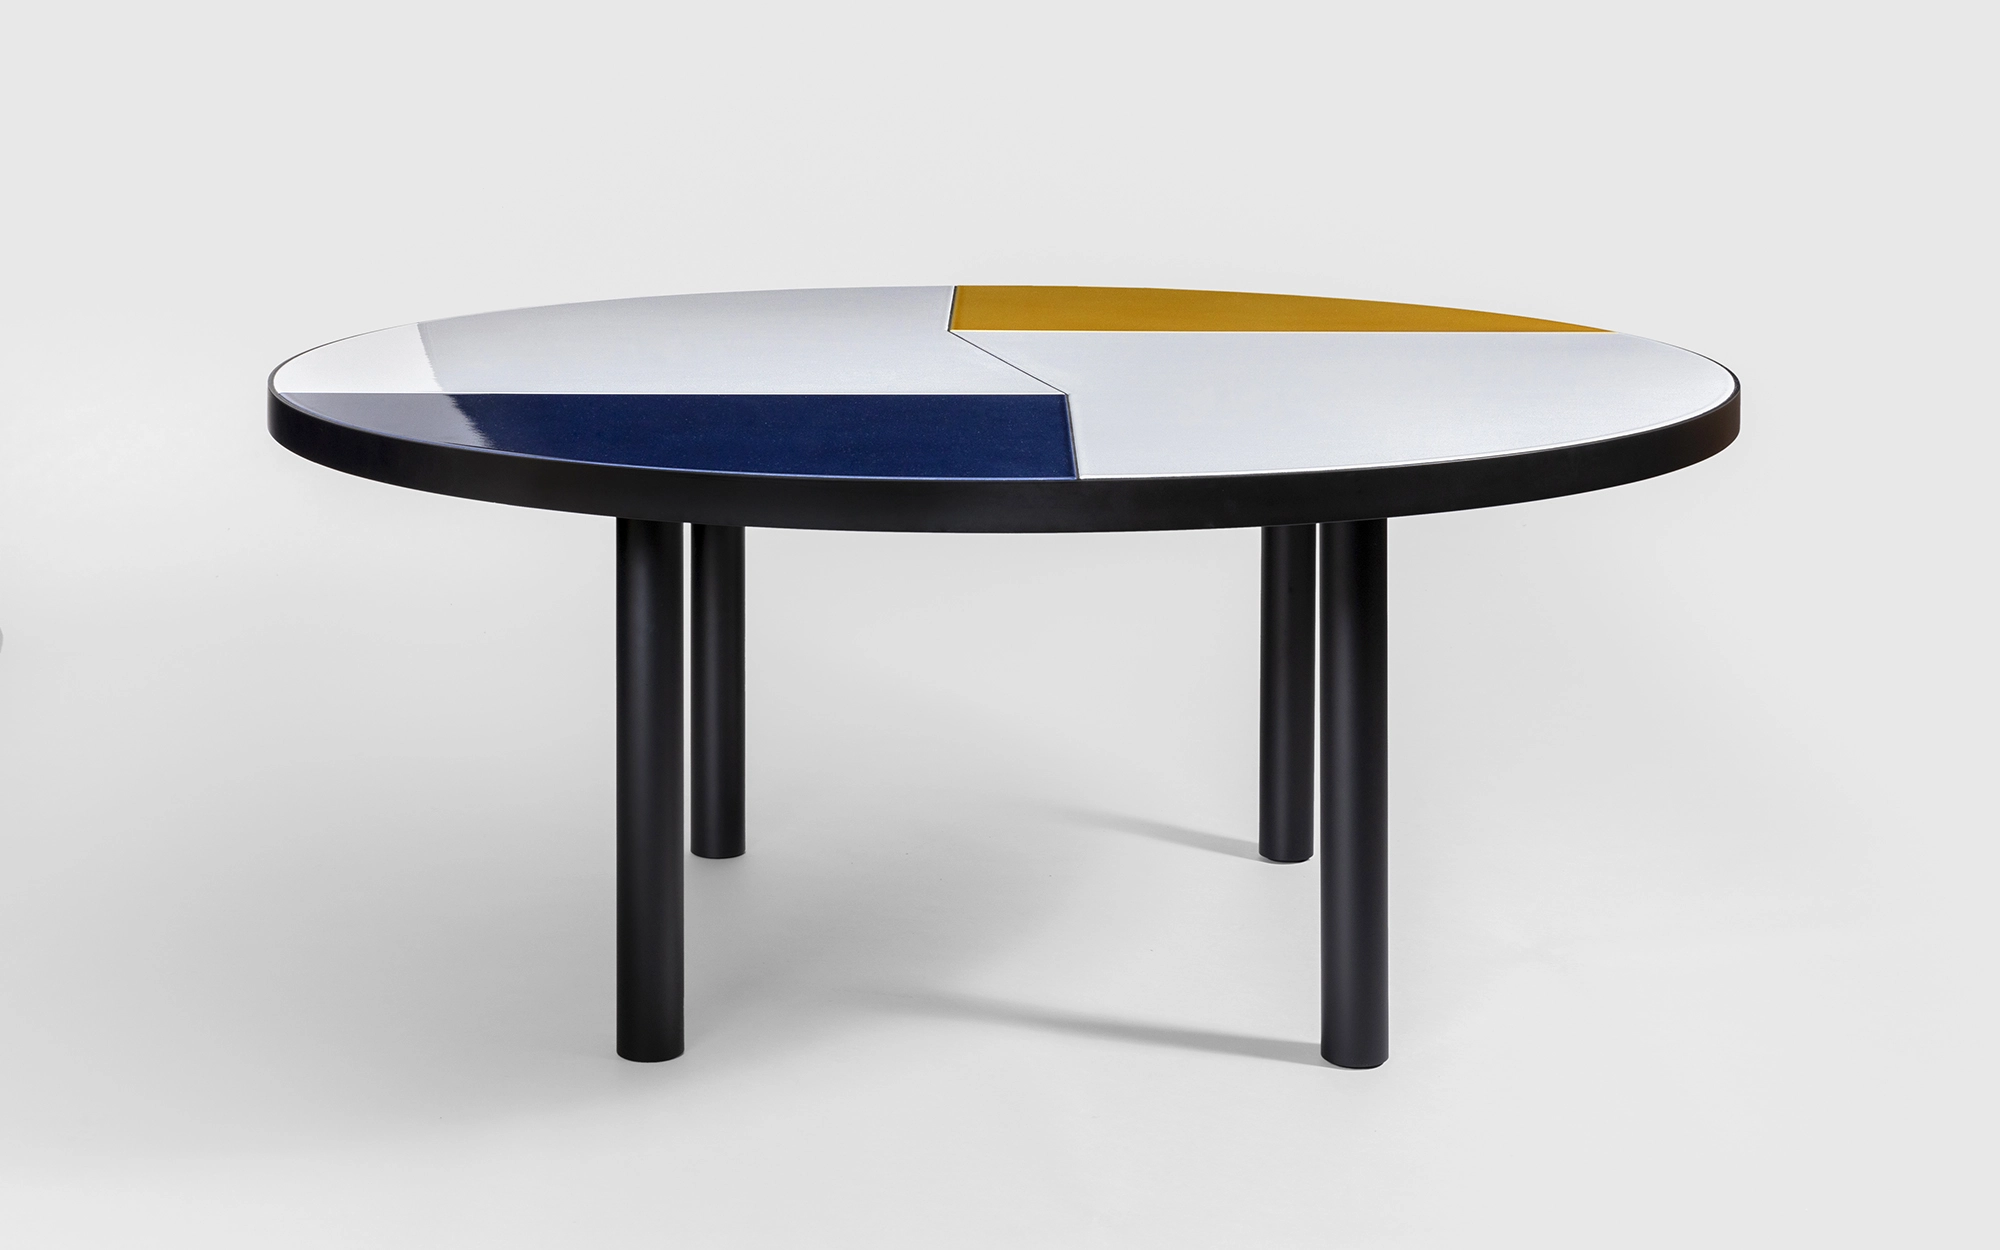 Fraction Dining Table - Pierre Charpin - Coffee table - Galerie kreo